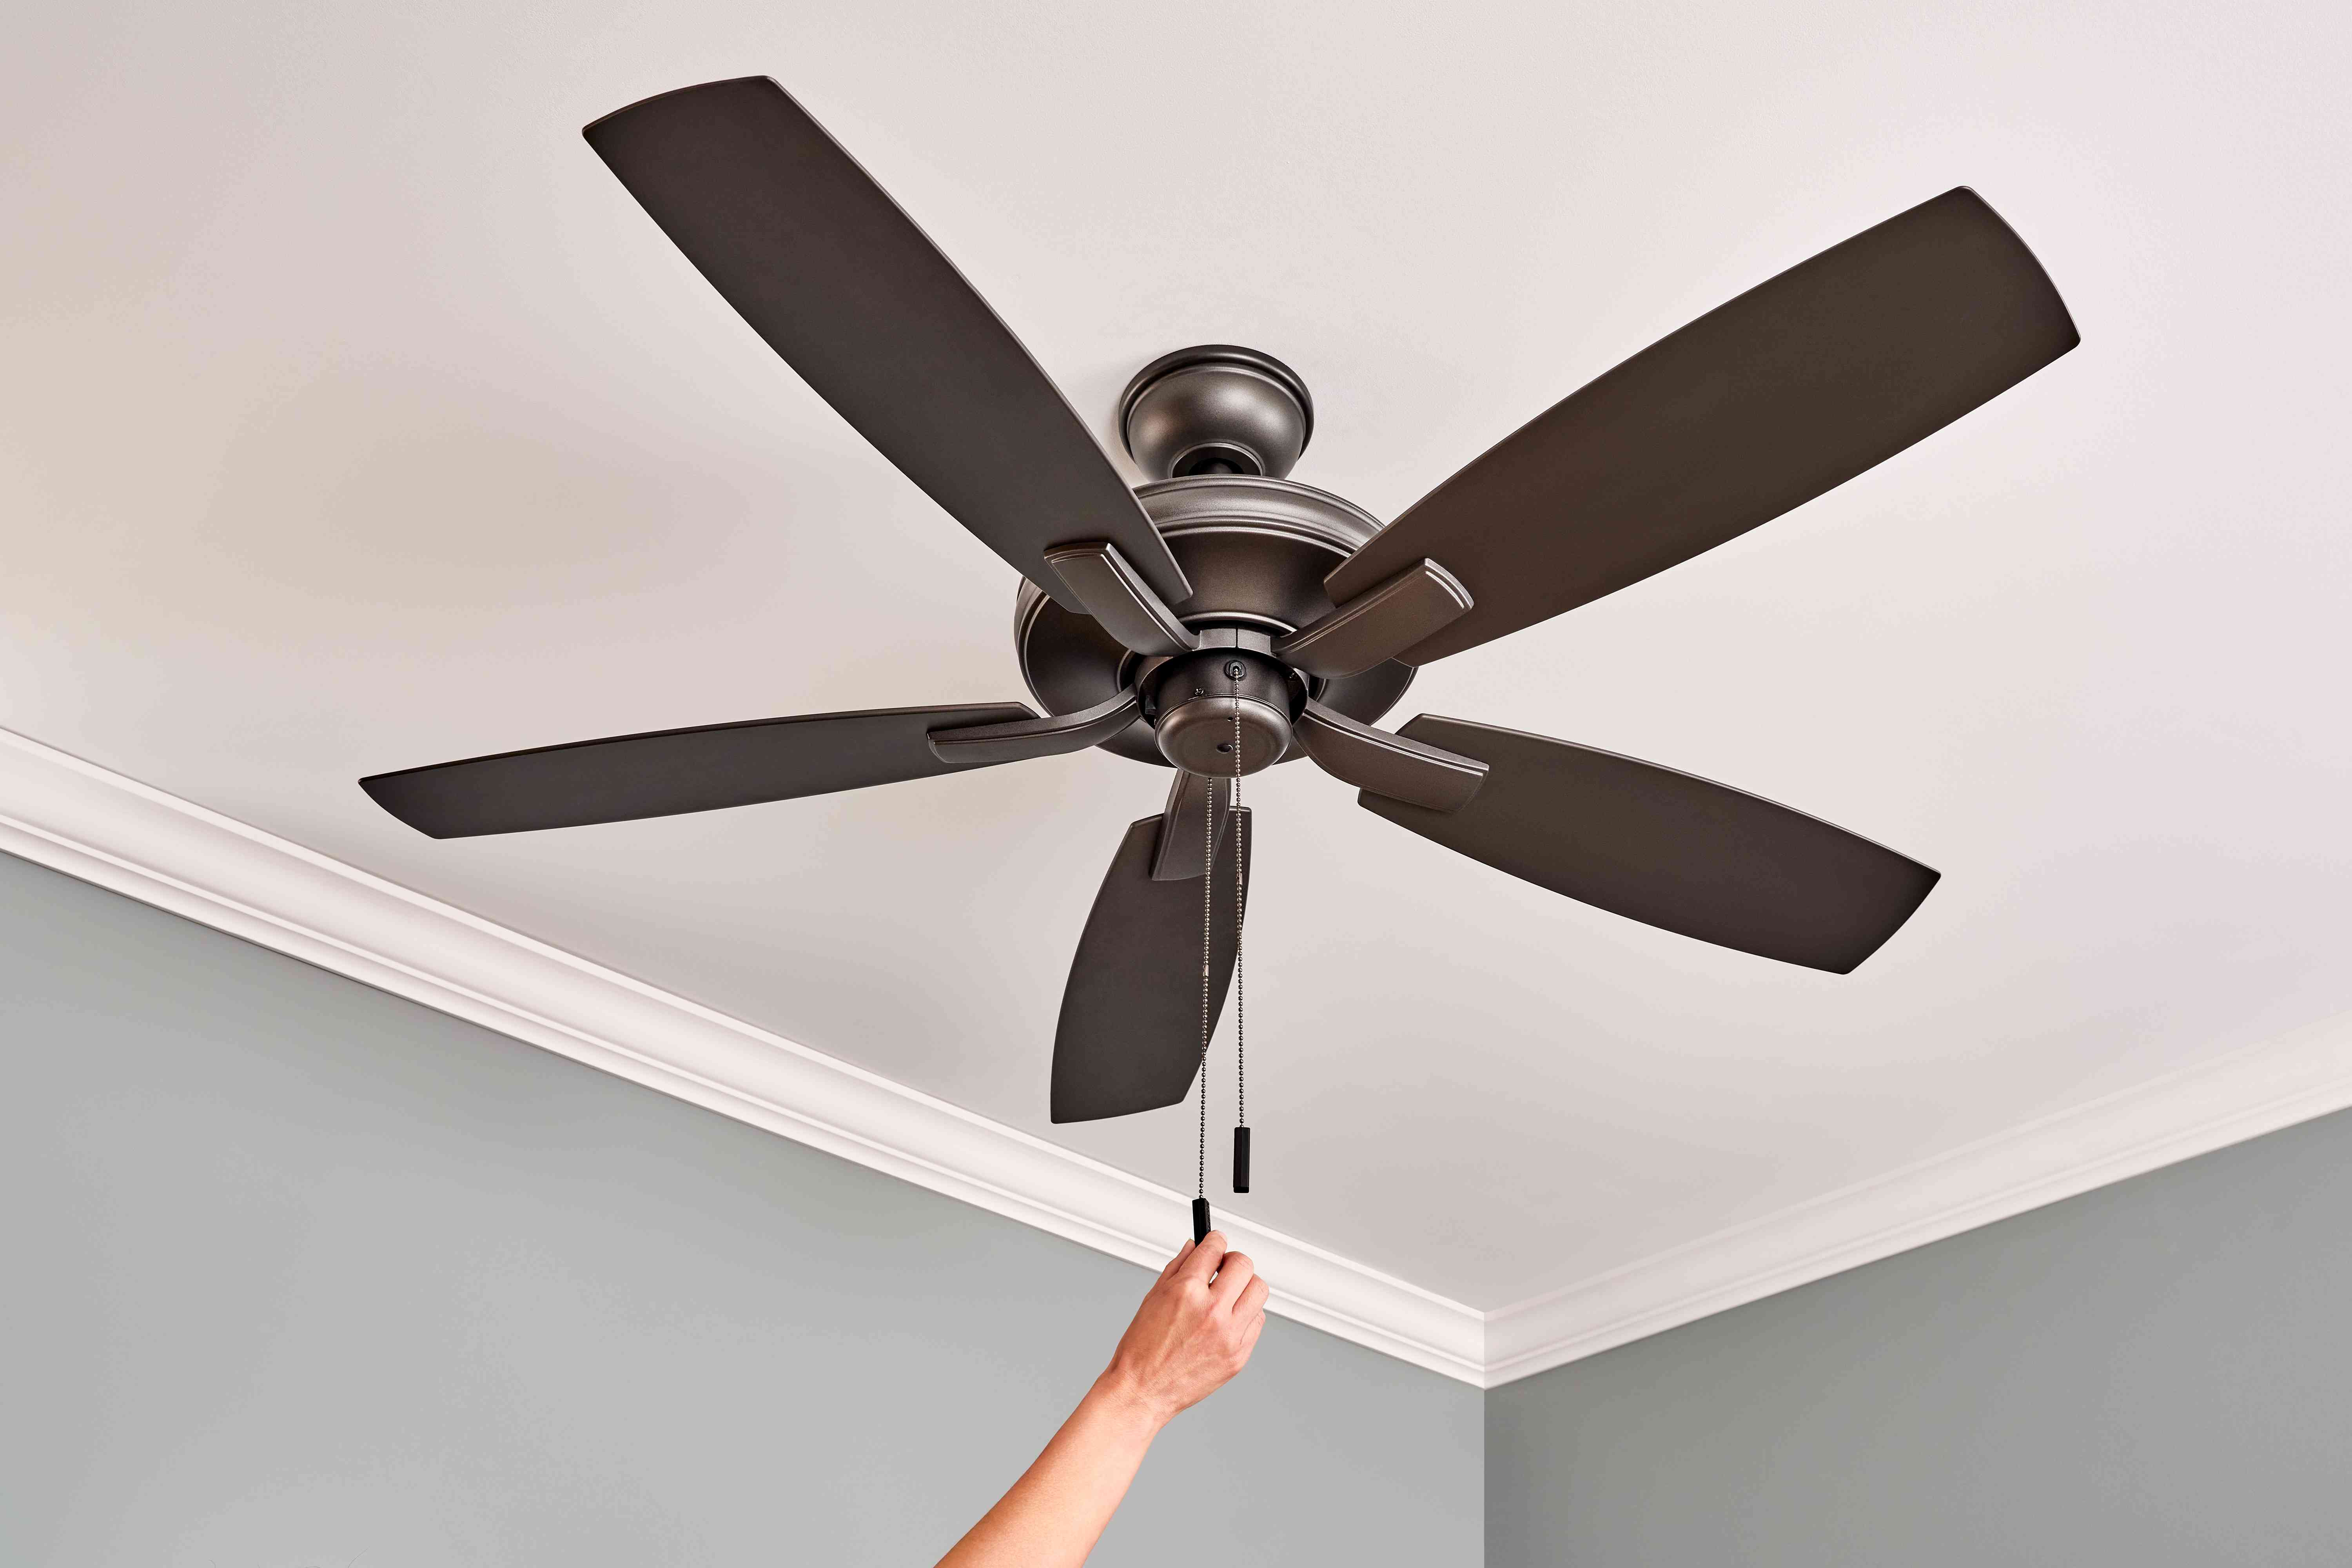 How to Change Direction on Ceiling Fan Without Switch: Easy Hack!